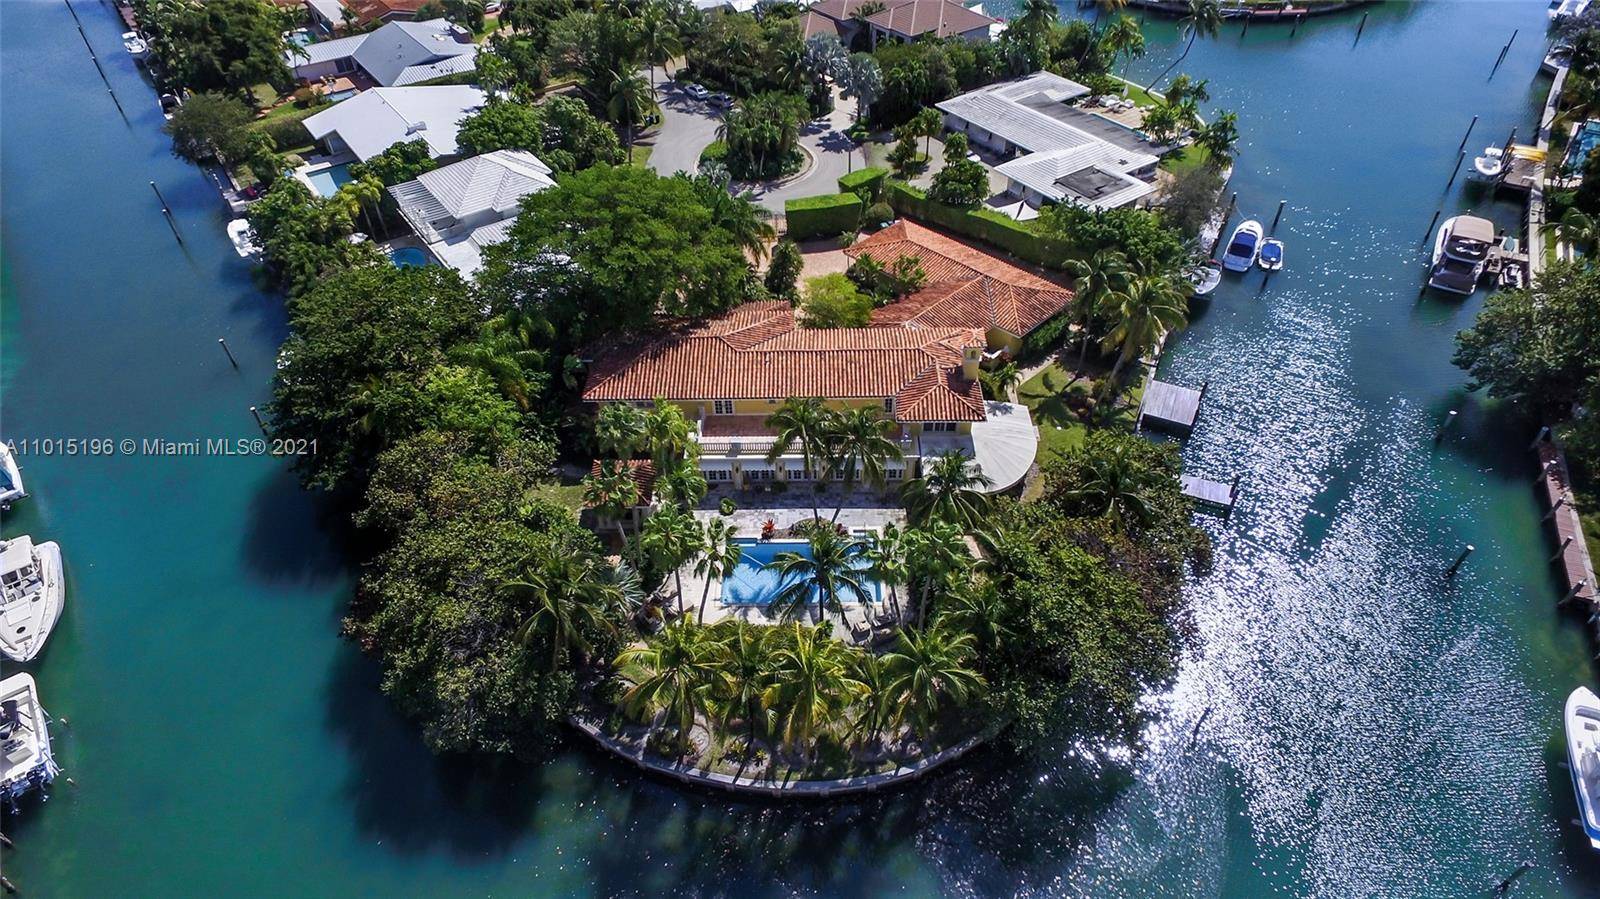 Living on the edge has a new meaning with 327 ft of incredibly lush waterfront views showcasing this secluded, private tropical peninsular estate.